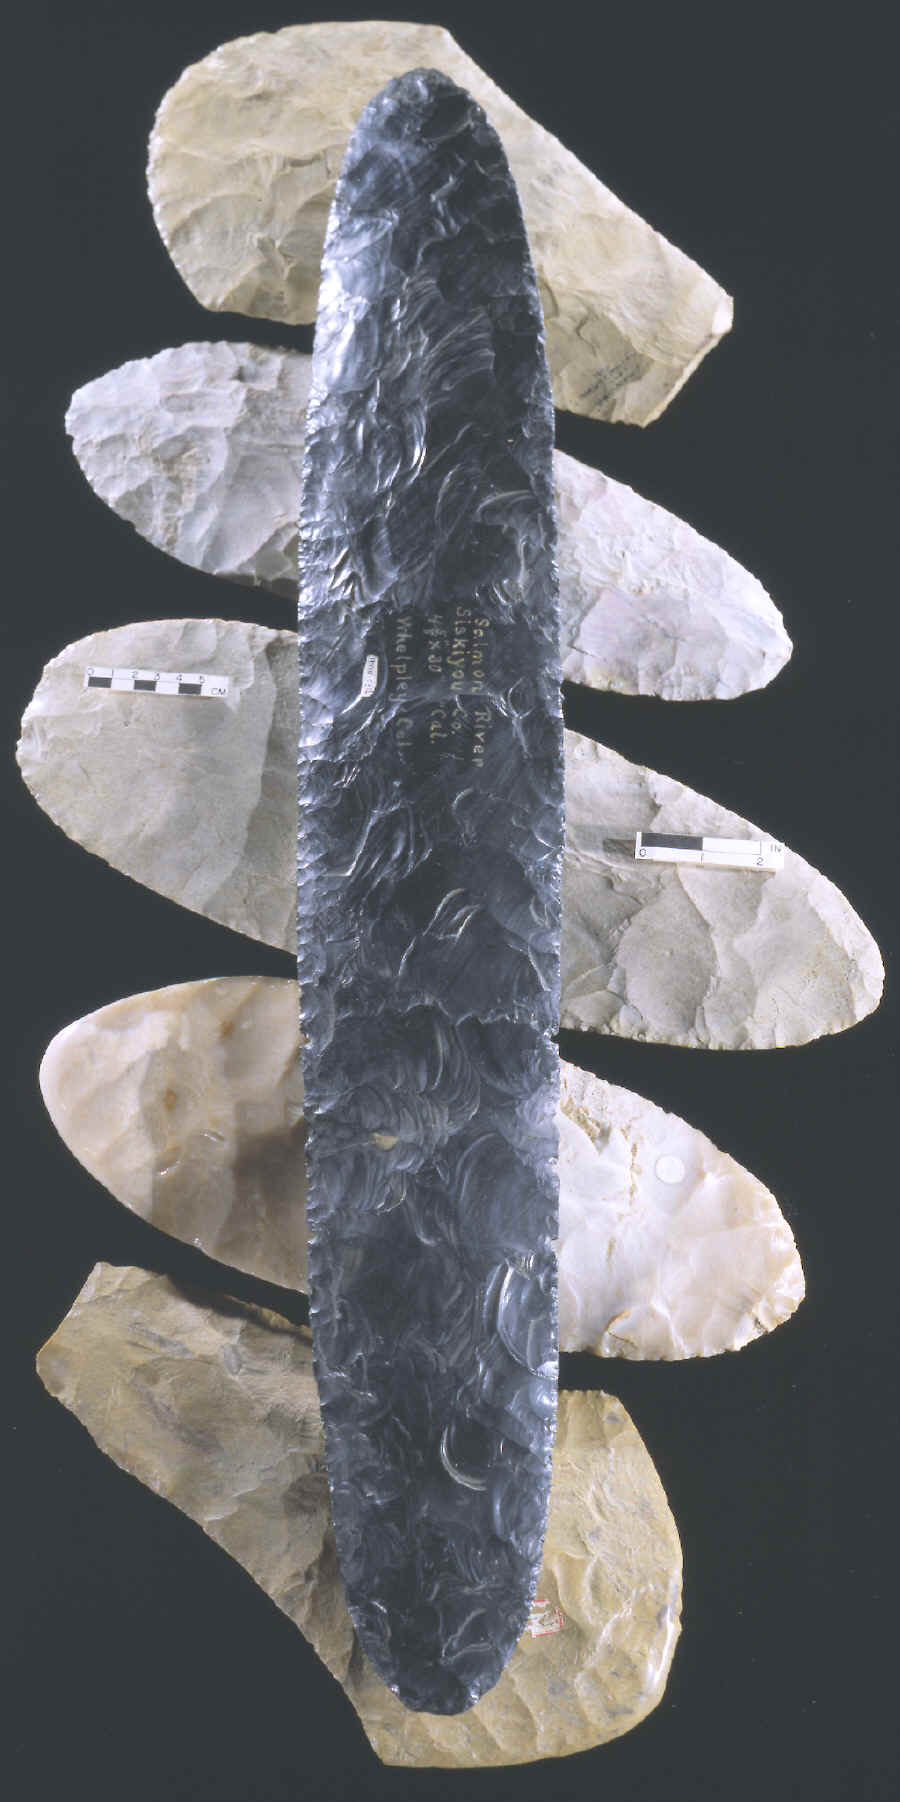 Large obsidian biface laying on 5 large spades.